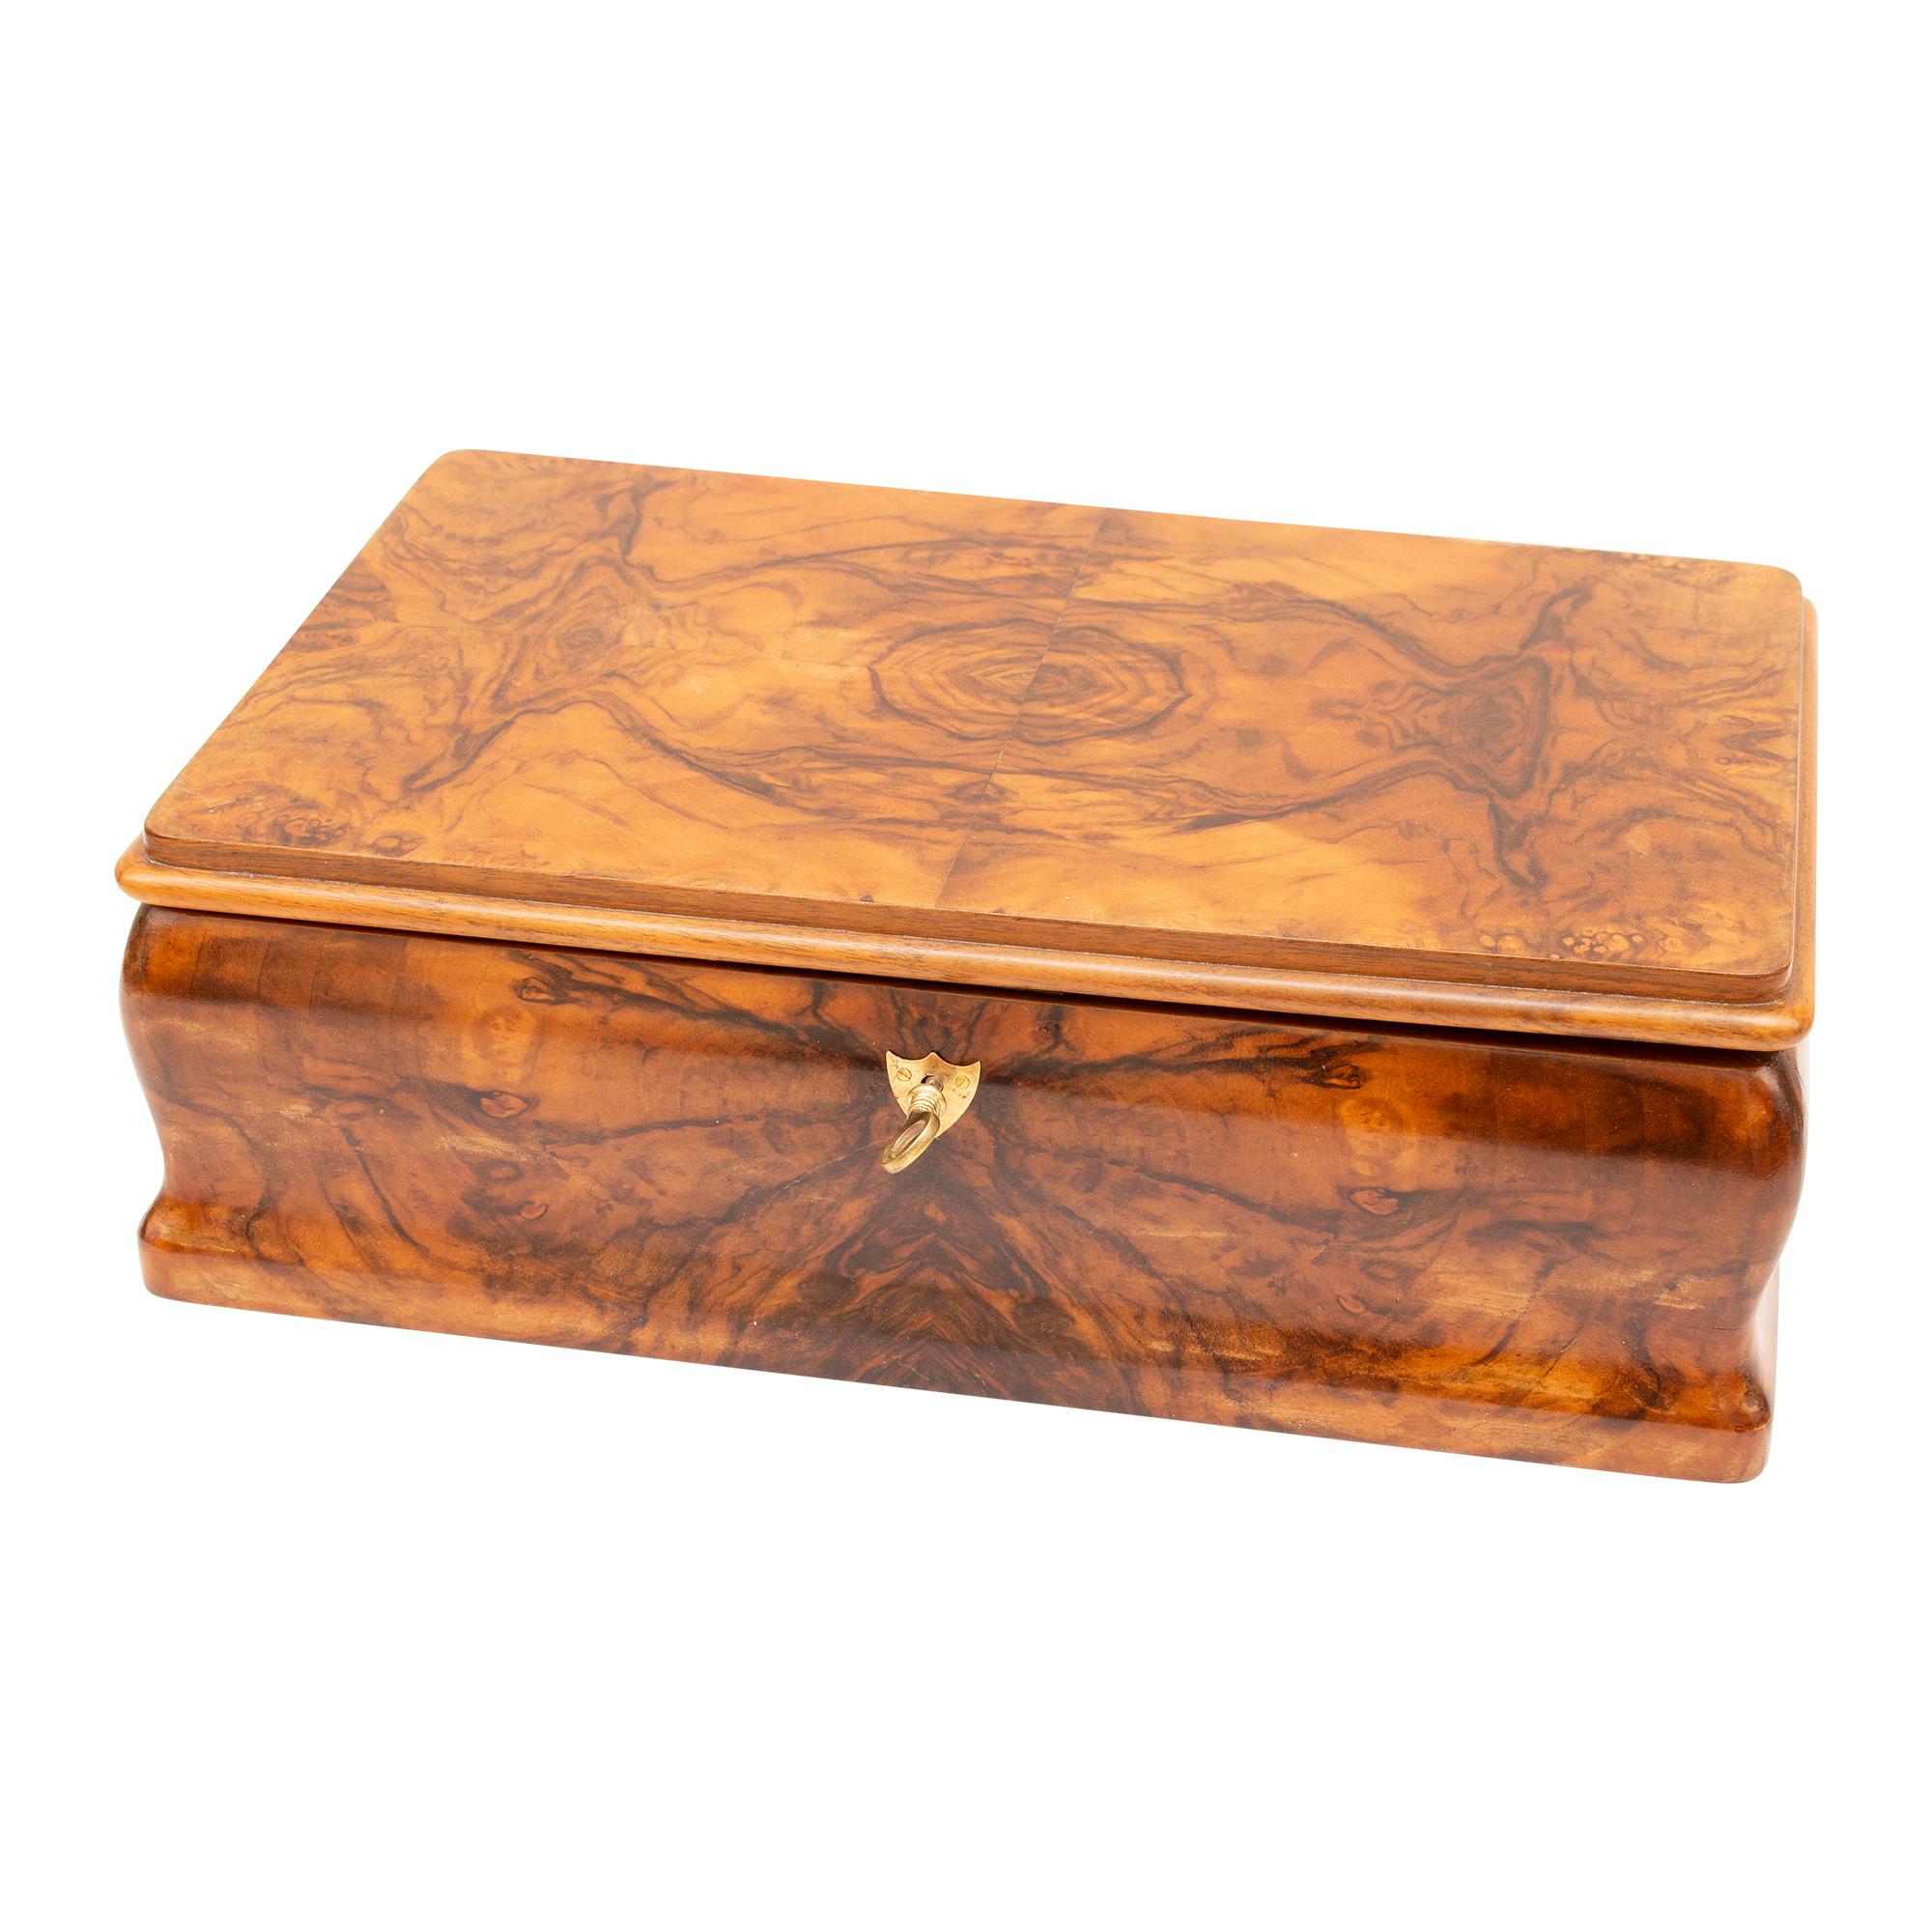 This stunning Biedermeier casket is crafted from walnut veneer on a spruce body, with a removable oak partition and a maple veneer interior. It has been expertly restored and hand-polished to an impeccable finish, and the lock is fully functional.